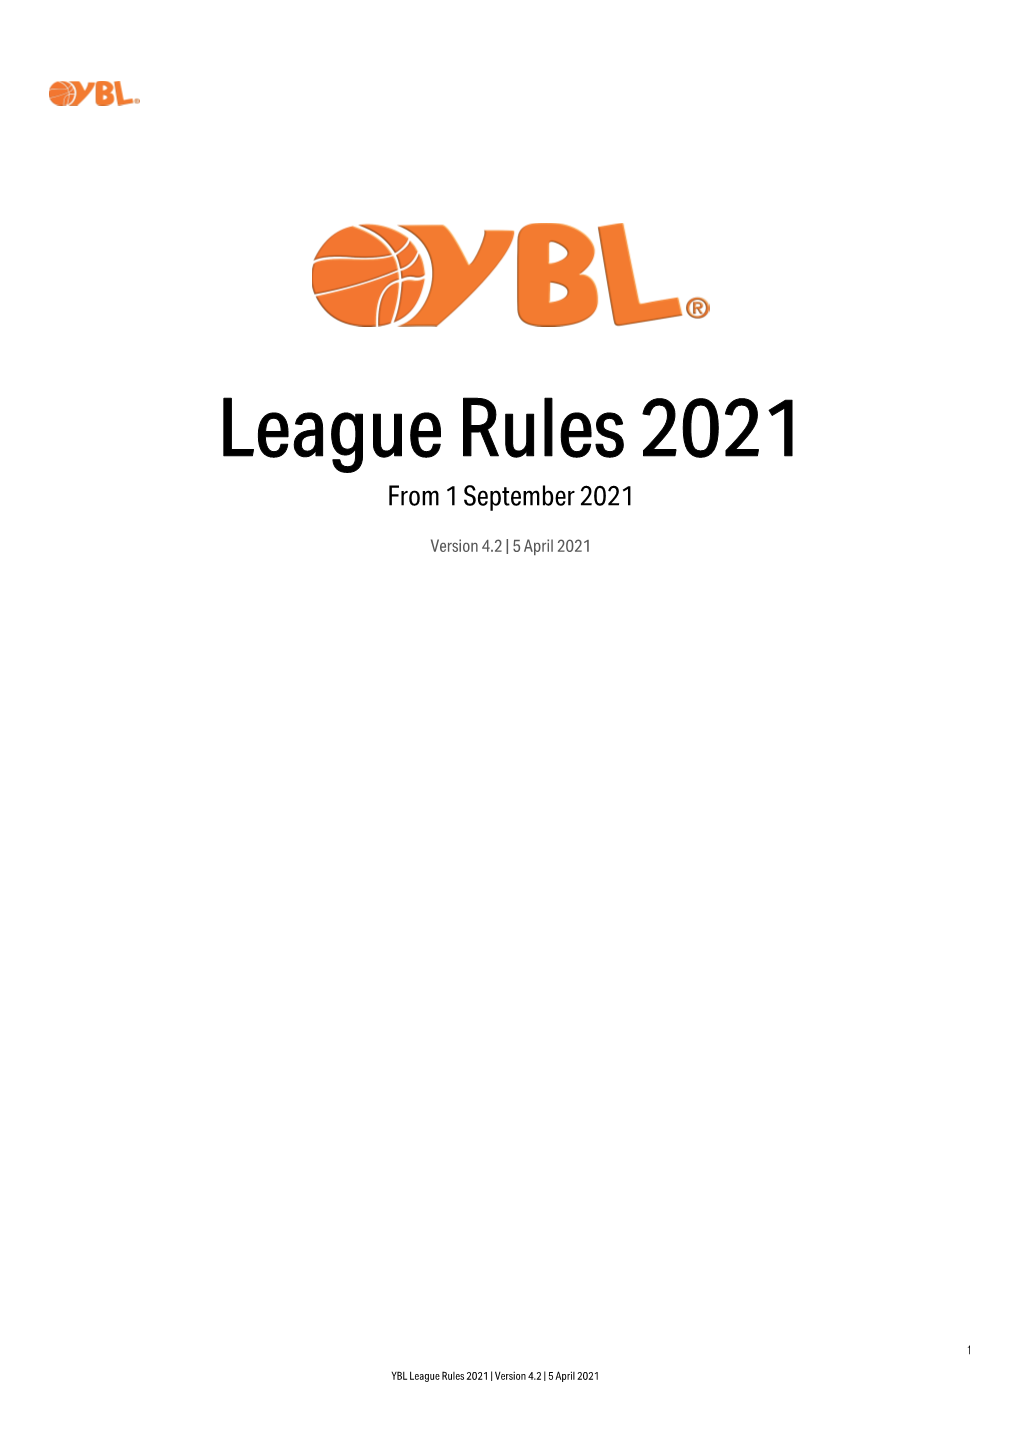 League Rules 2021 from 1 September 2021